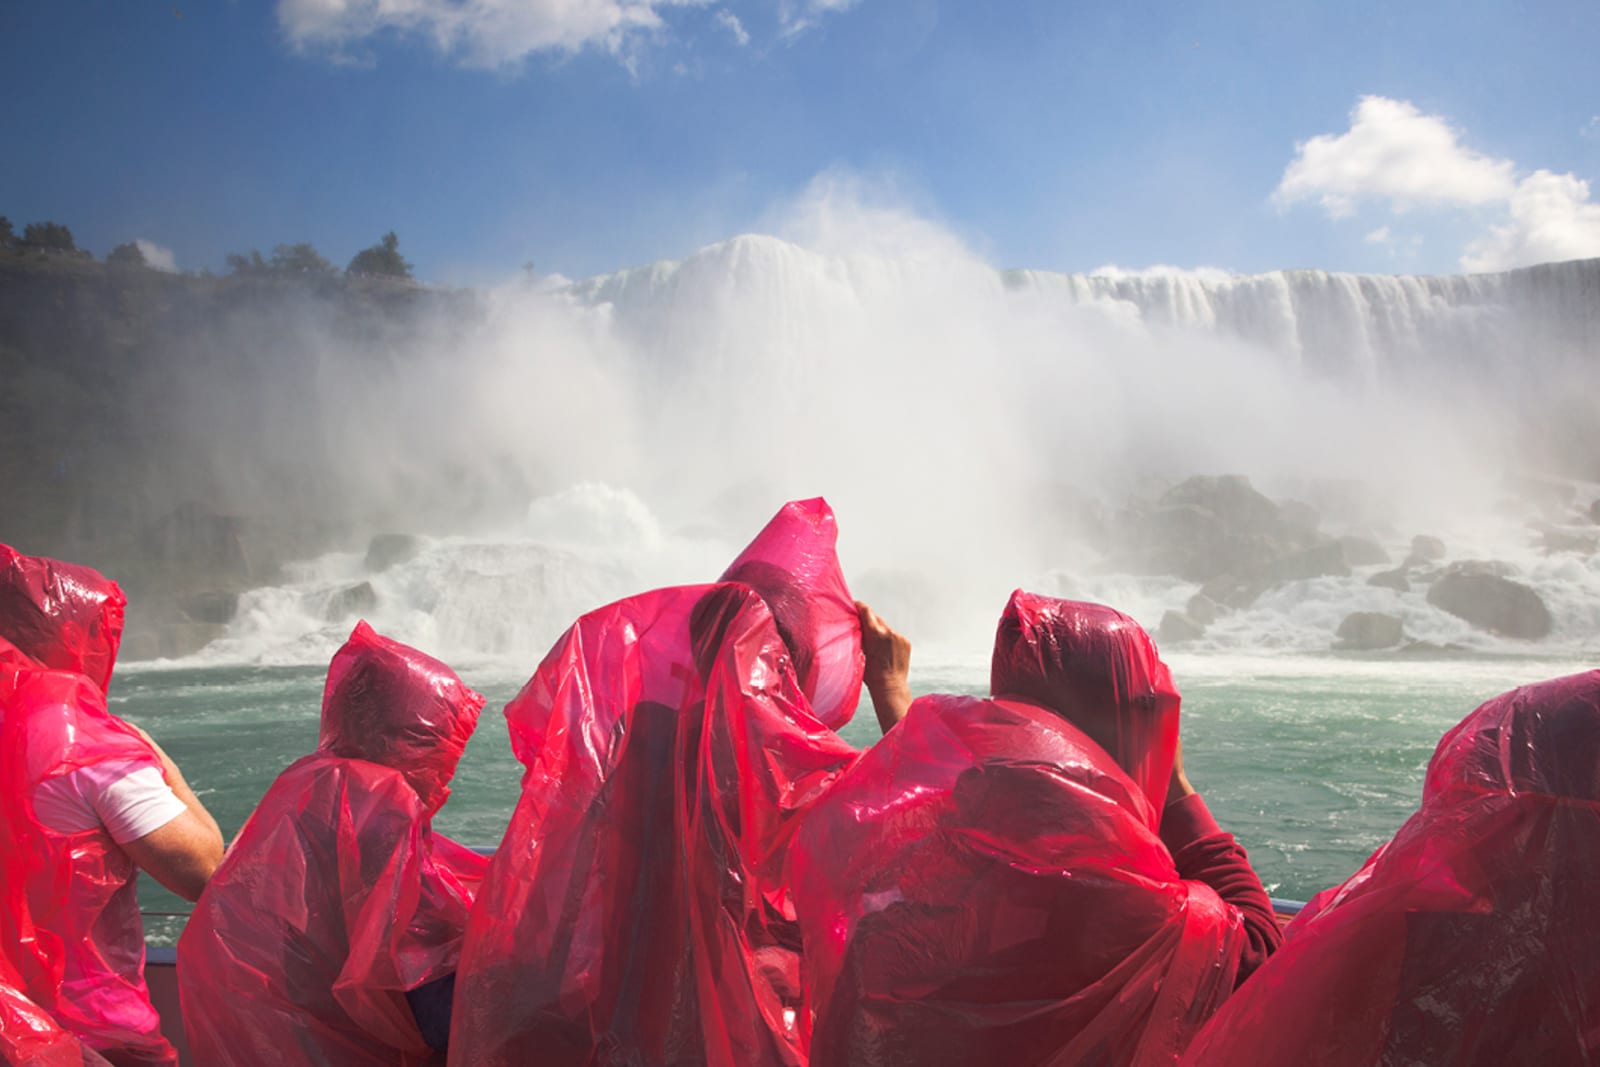 Group of people wearing ponchos while getting up close to Niagara Falls